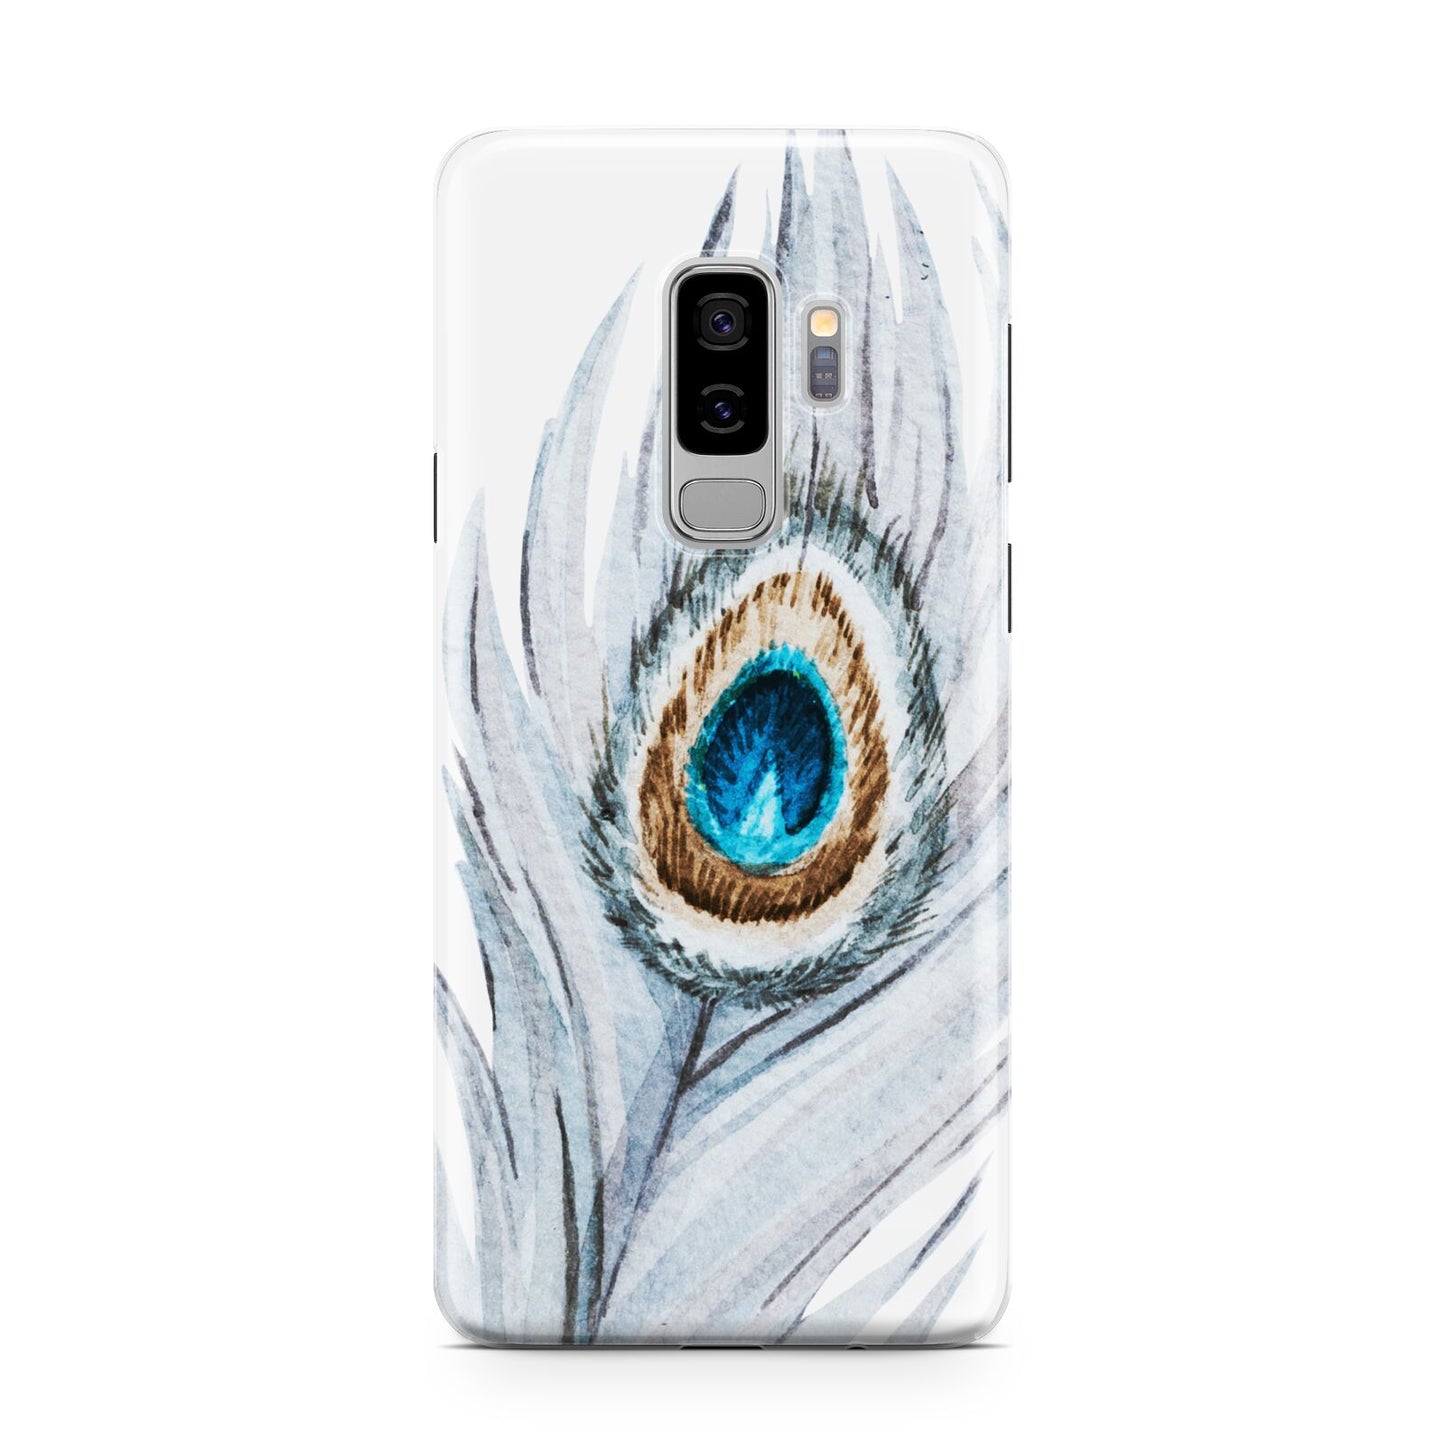 Peacock Samsung Galaxy S9 Plus Case on Silver phone